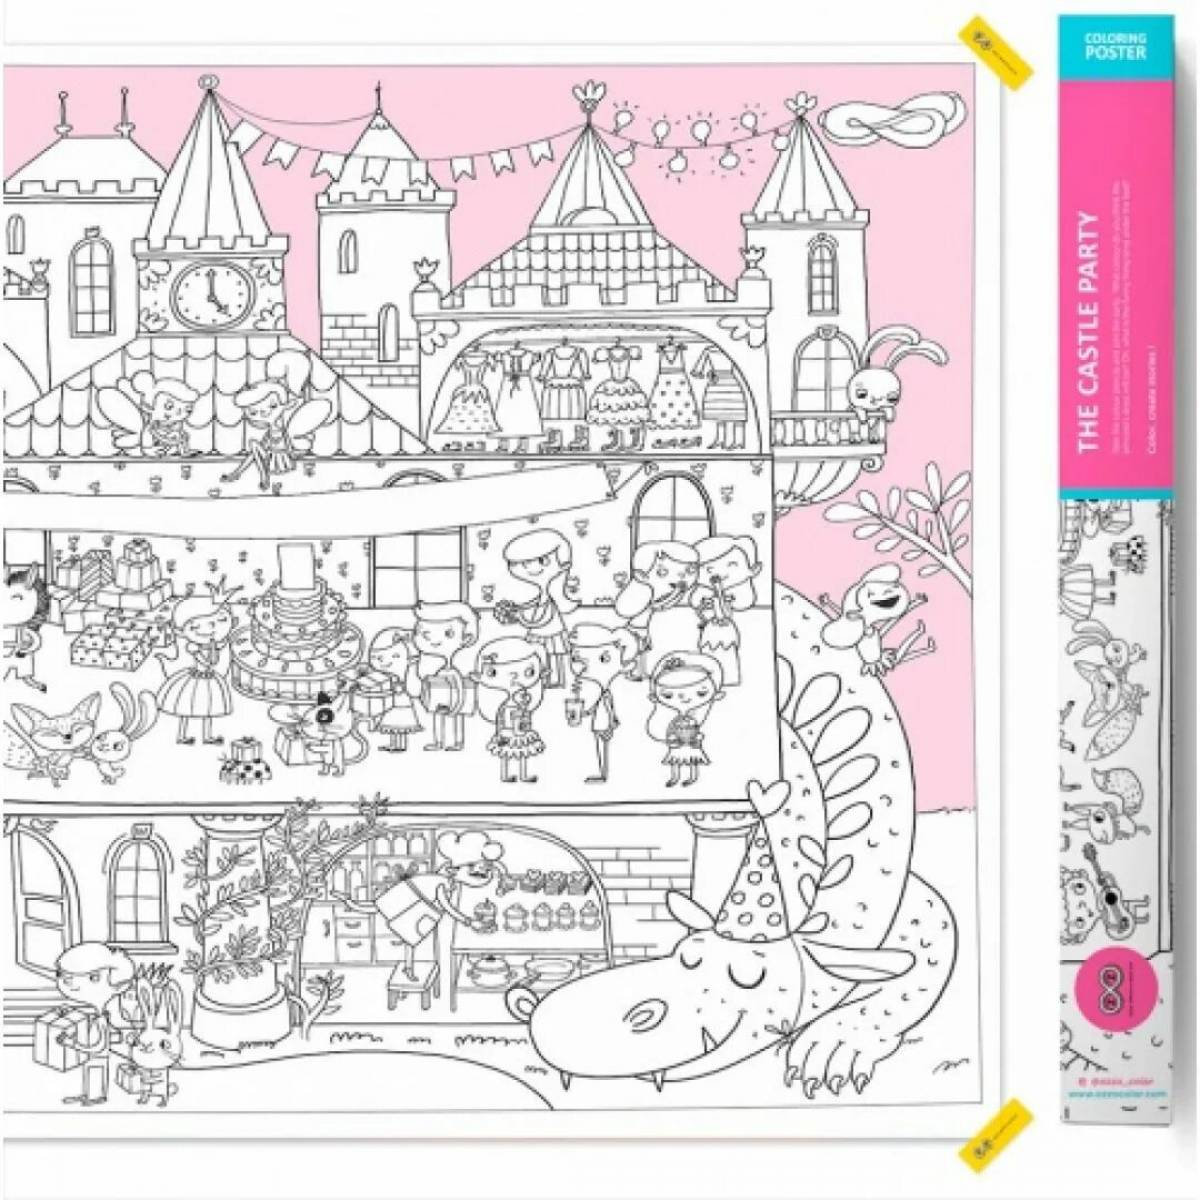 Elegant wimmelbuch coloring book for girls